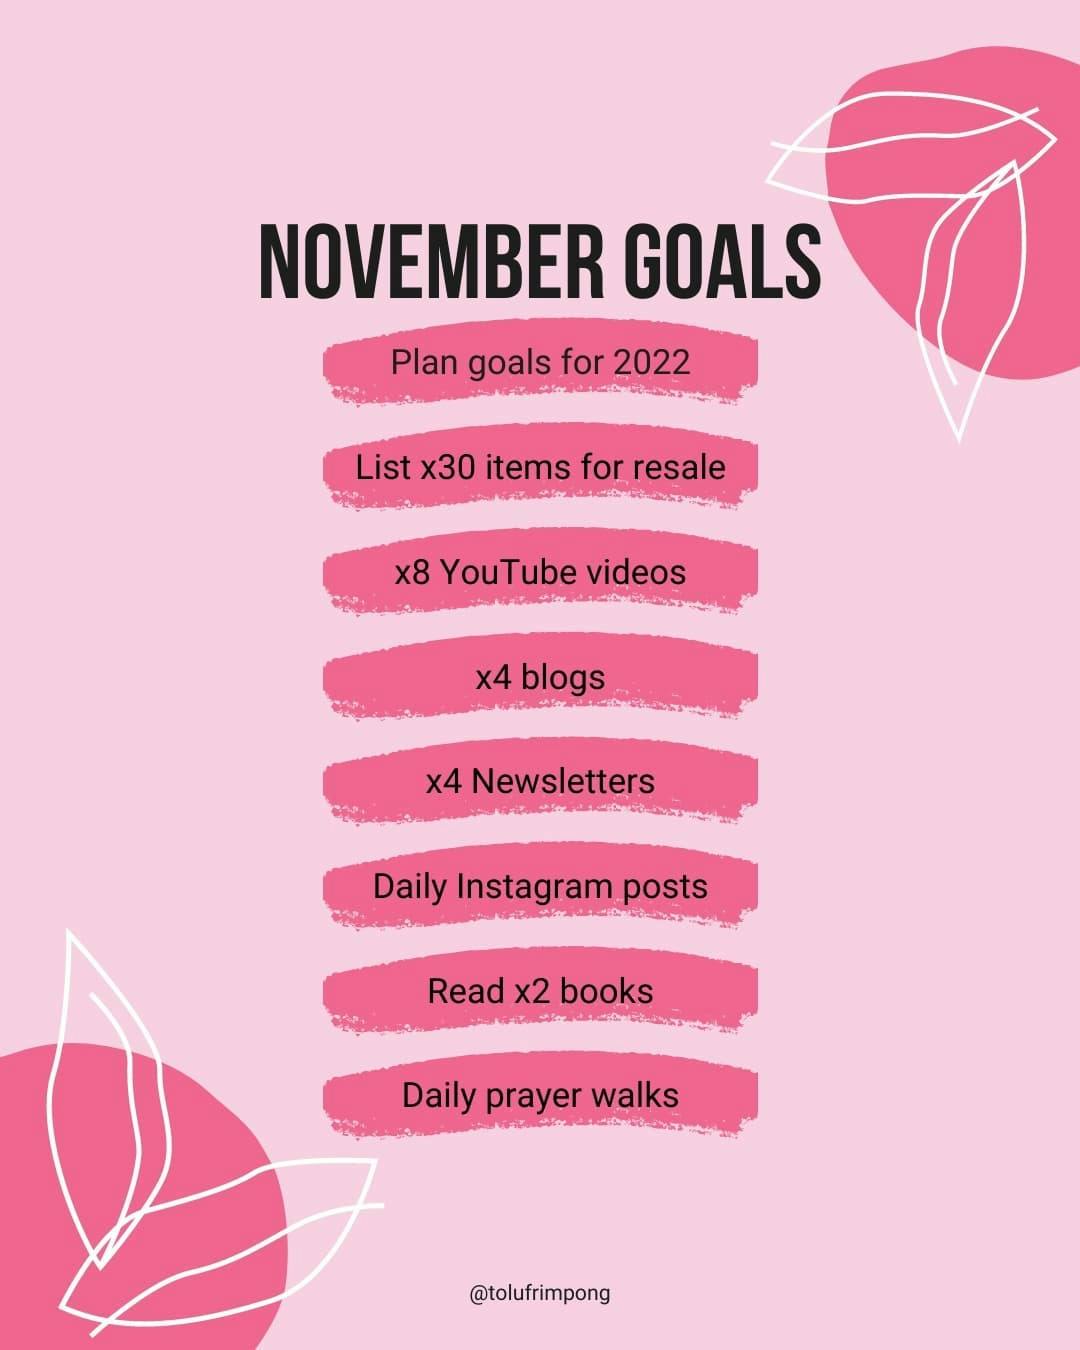 Here are my goals for November

🎯 Yes, it's only November but I want to start planning for the New Year

🎯 I didn't add any new listings to my eBay store in October, as a result my sales slowed down in the last 2 weeks of October

🎯 T-Money Talks finishes this week so getting 8 youtube videos published without the replays will be challenging

🎯 I had a good run last month with blog posts. Thanks for contributing a guest post @naa2norkor. If you're in the finance space and want to submit a guest post please let me know! 

🎯 I'm keeping the weekly newsletters goal on here so I don't fall off again. Sign up via the link in my bio to receive weekly updates, with freebies, tips, offers and more. 

🎯 Consistency compounds, so I'm committing to daily IG posts, comment below and tell me what content you want to see 

🎯 I didn't manage to go for prayer walks every day in October, let's see if I can do it in November

What are your goals for November? Share  below👇🏿👇🏿

#novembergoals #goalgetter #goals #financialgoals #ukdebtfreecommunity #debtfreecommunityuk #sidehustlegoals #debtfreeuk #blackdebtfreecommunity #blackpfcommunity #debtfreeuk #debtfreecommunityuk  #personalfinance #financialfreedom #financialindependence #ukmoneyblogger #ukmoneycoach #conversationsaboutmoney #financialpeace #financialliteracy